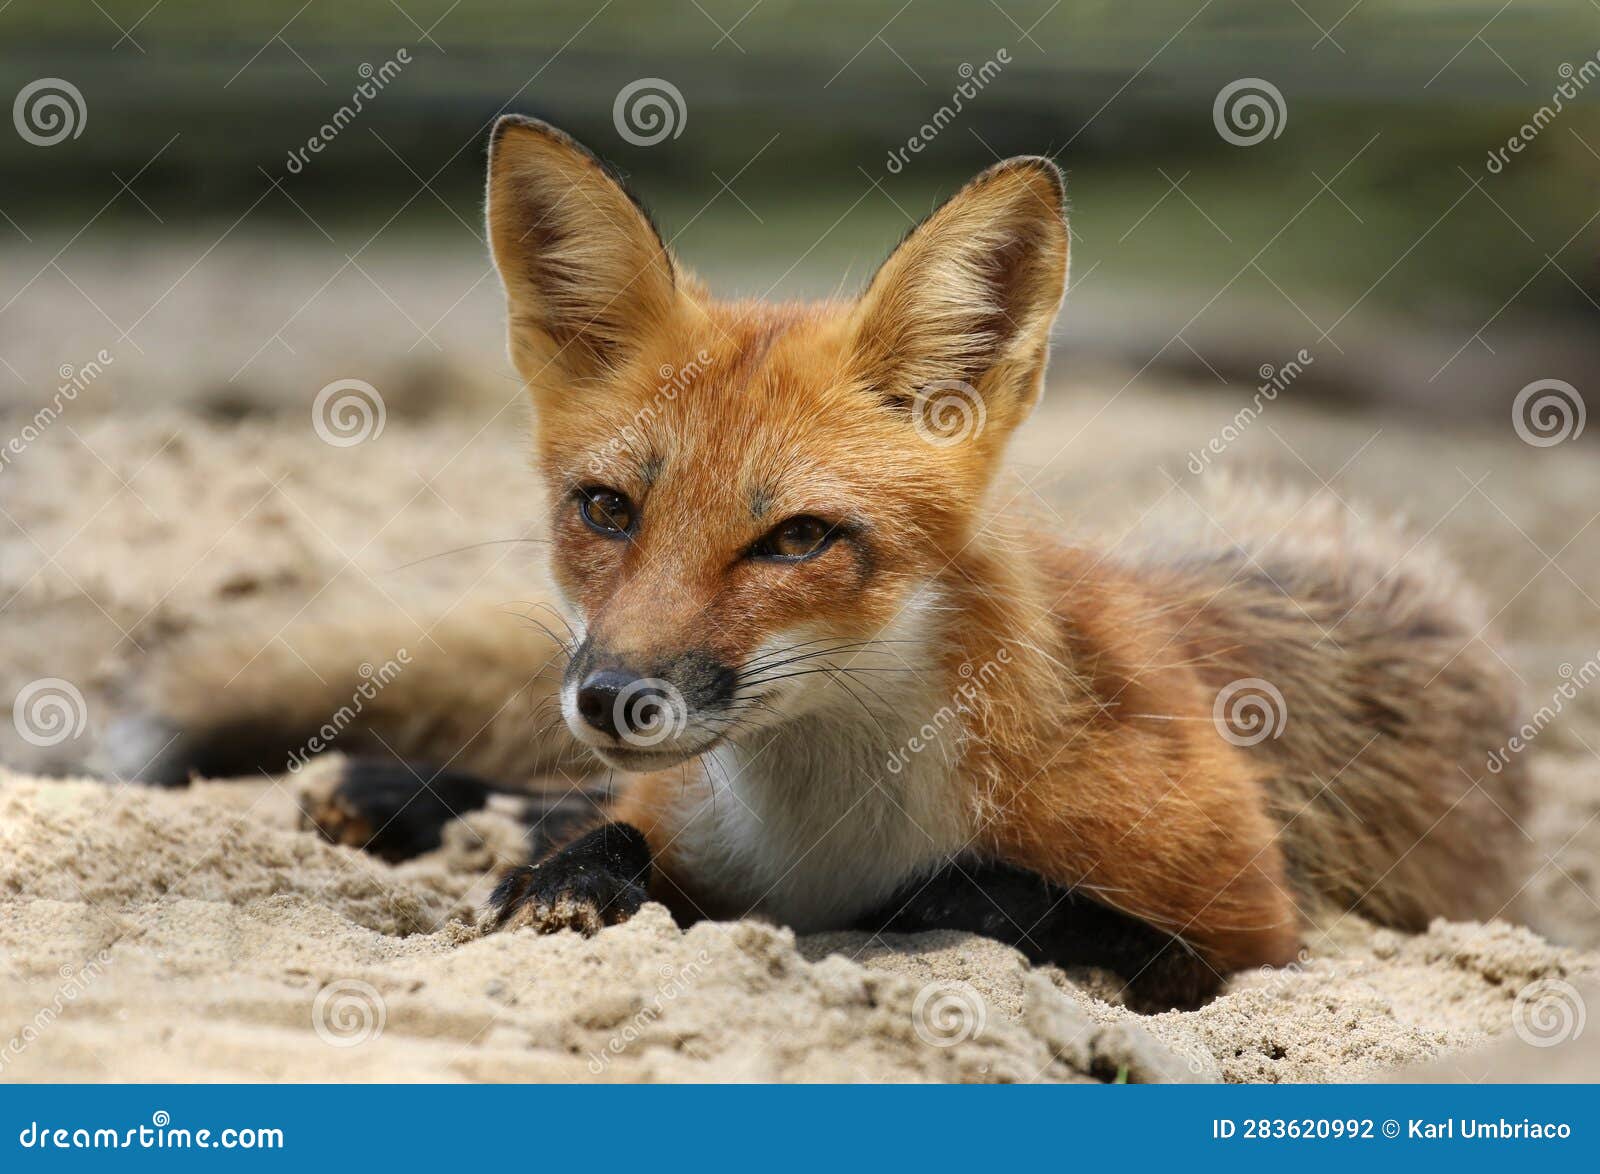 young red fox in nature